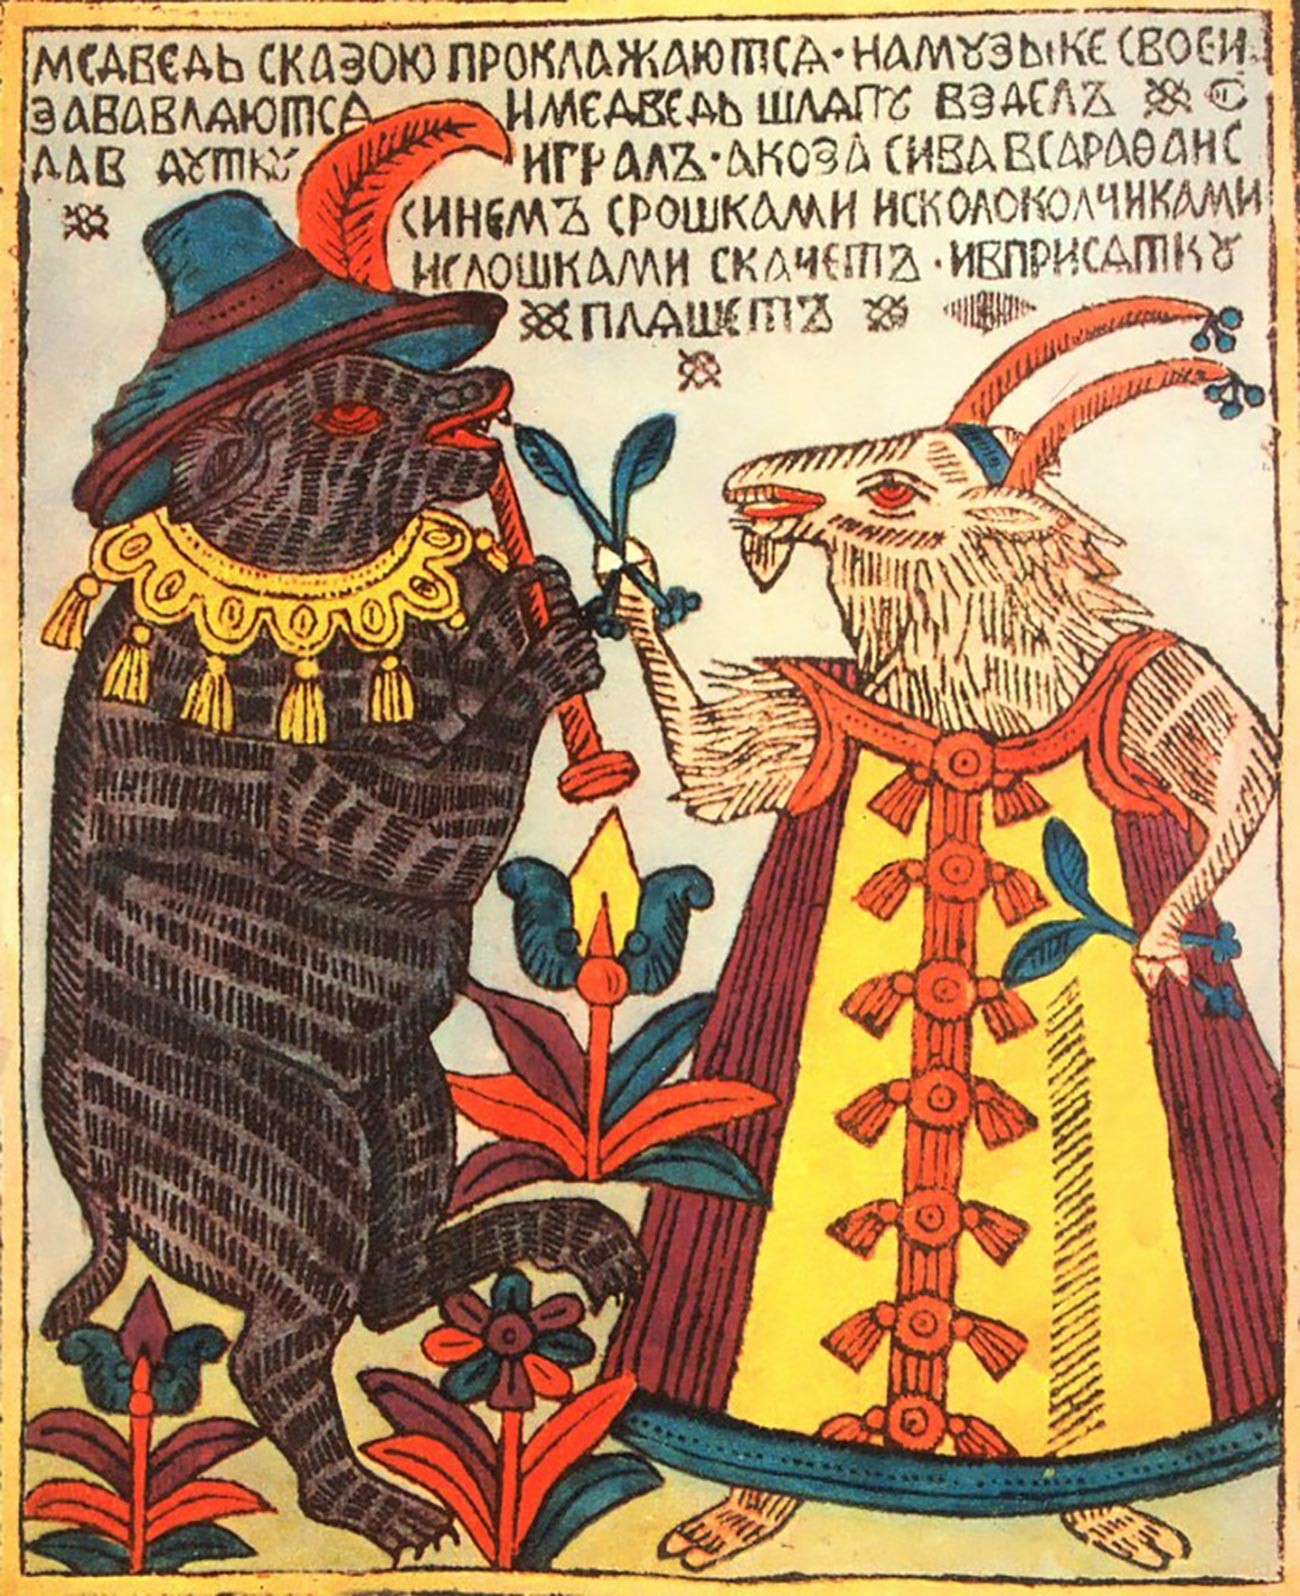 Lubok, 18th century. The caption reads: “A bear and a she-goat are idling away the time, having fun playing their music. The bear has put his hat on and is blowing his pipe, while the gray she-goat has put on a blue sarafan and with its trumpets and bells and spoons is jumping and squat dancing.”